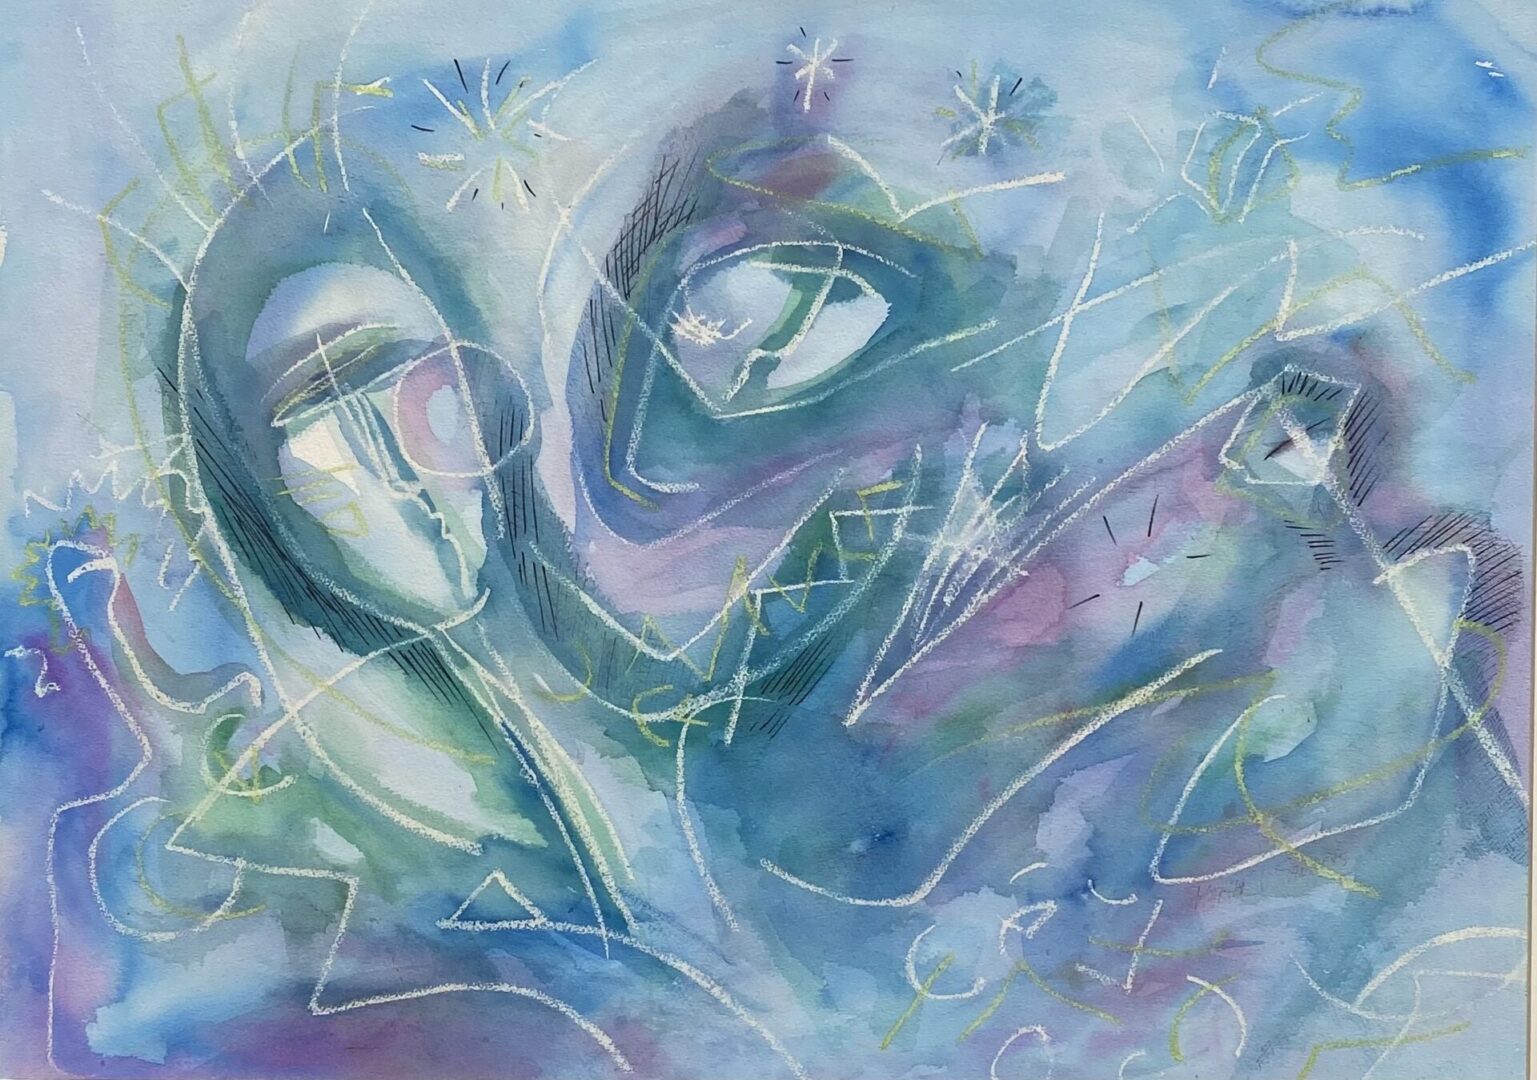 A painting of two faces with purple and blue colors